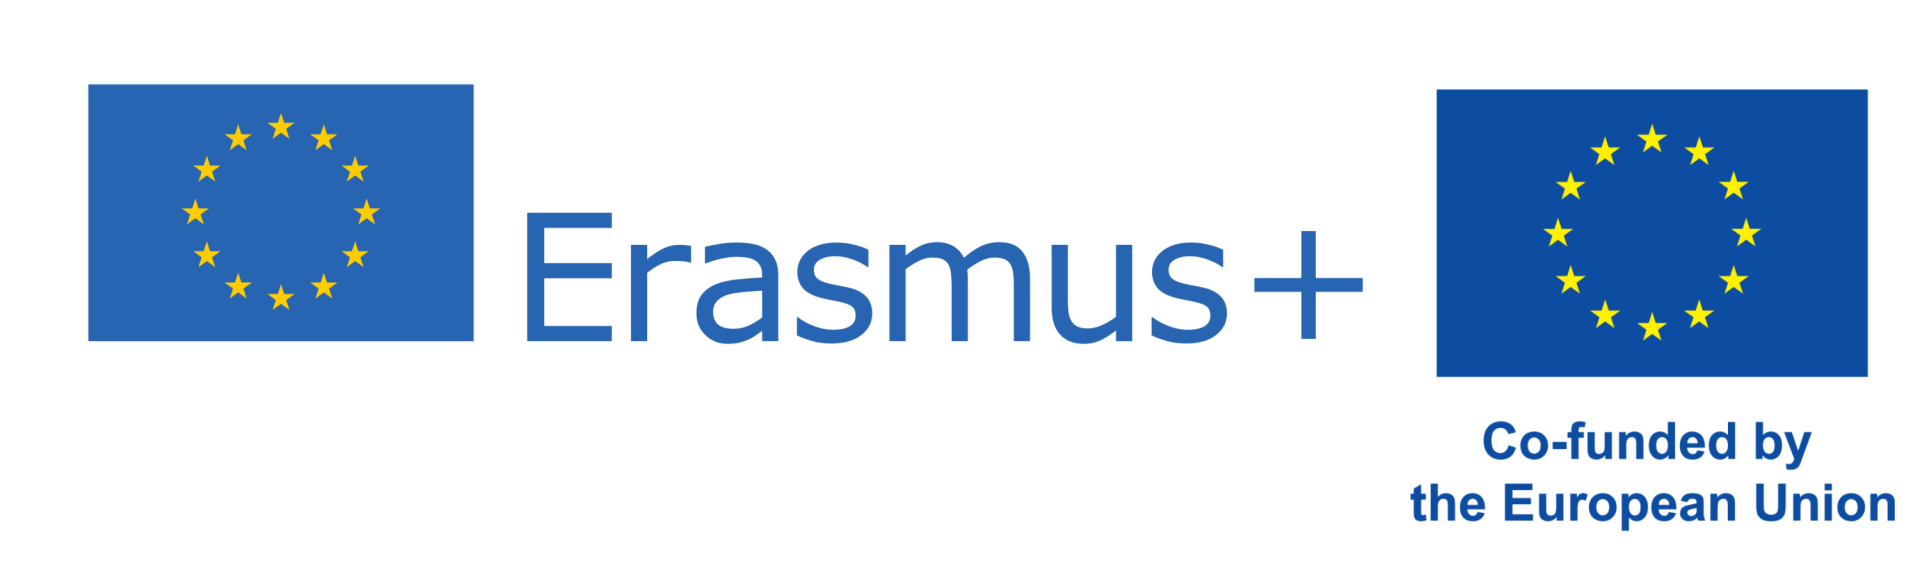 Erasmus+ and co-funded by the European Union